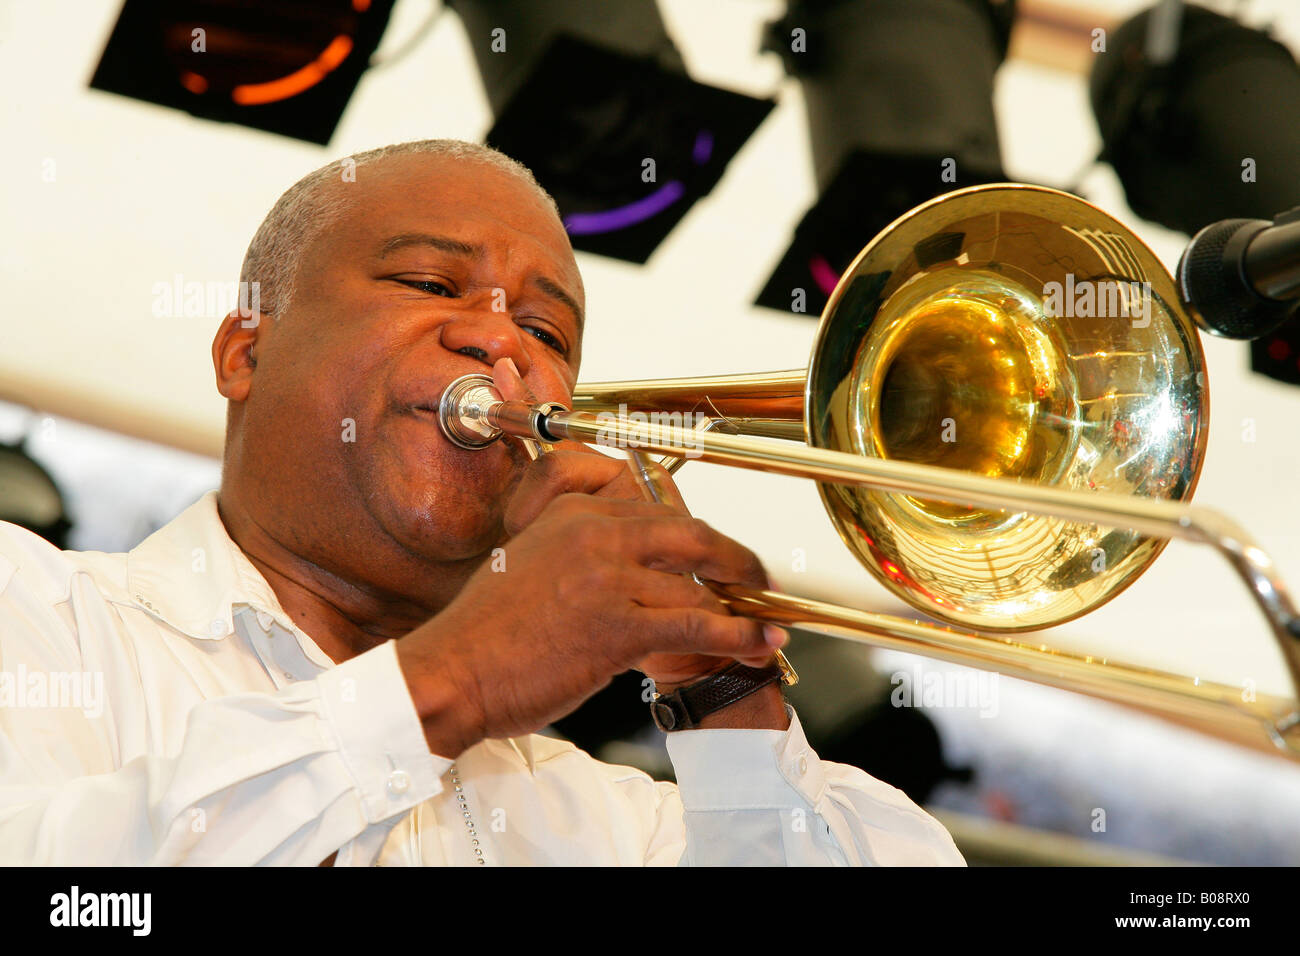 Trombonist, Ambros Seelos Band performing at a jazz festival in Muehldorf am Inn, Bavaria, Germany Stock Photo